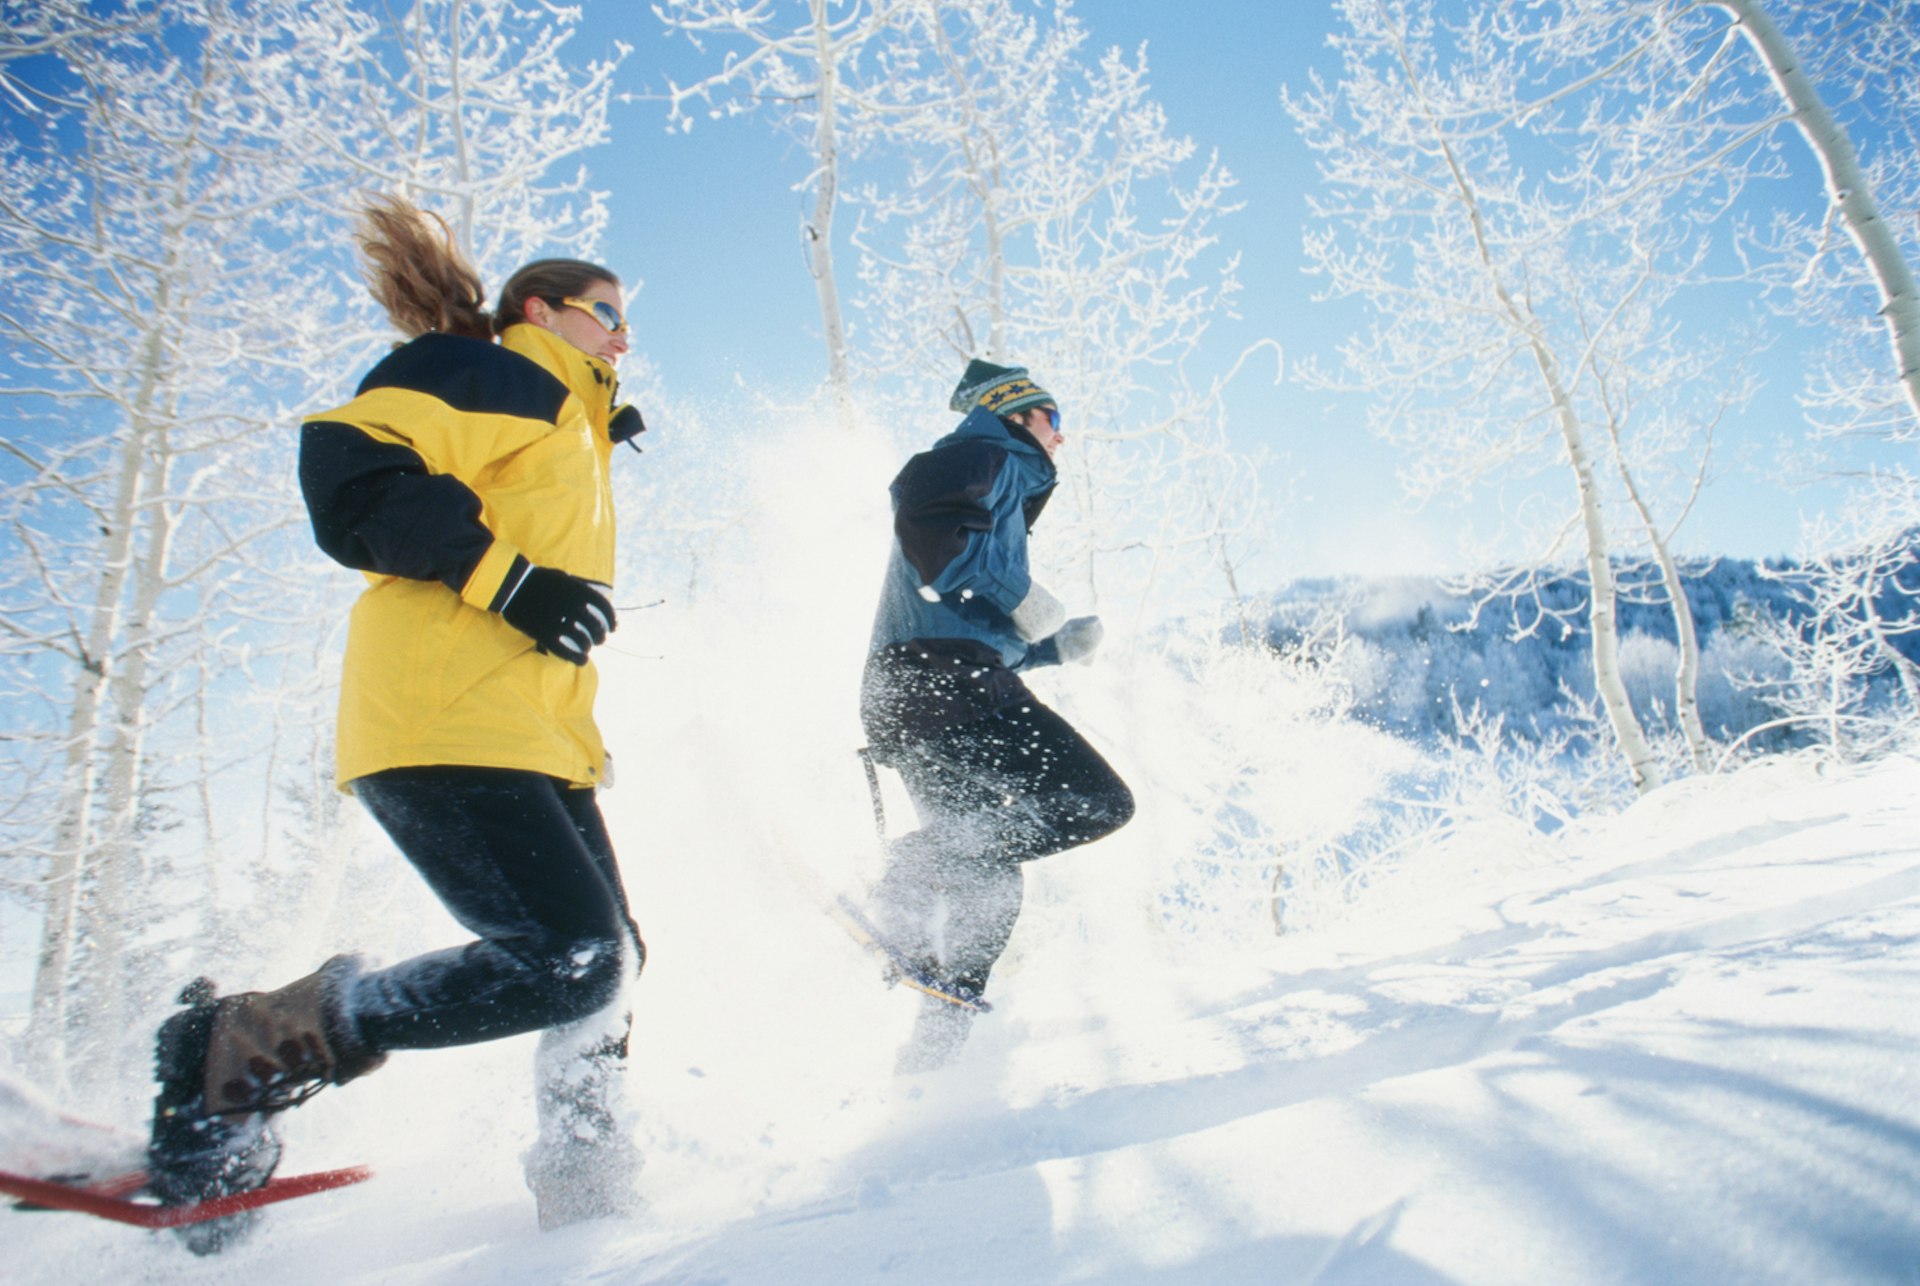 Snowshoeing is another popular activity in Park City © Lori Adamski Peek / The Image Bank / Getty